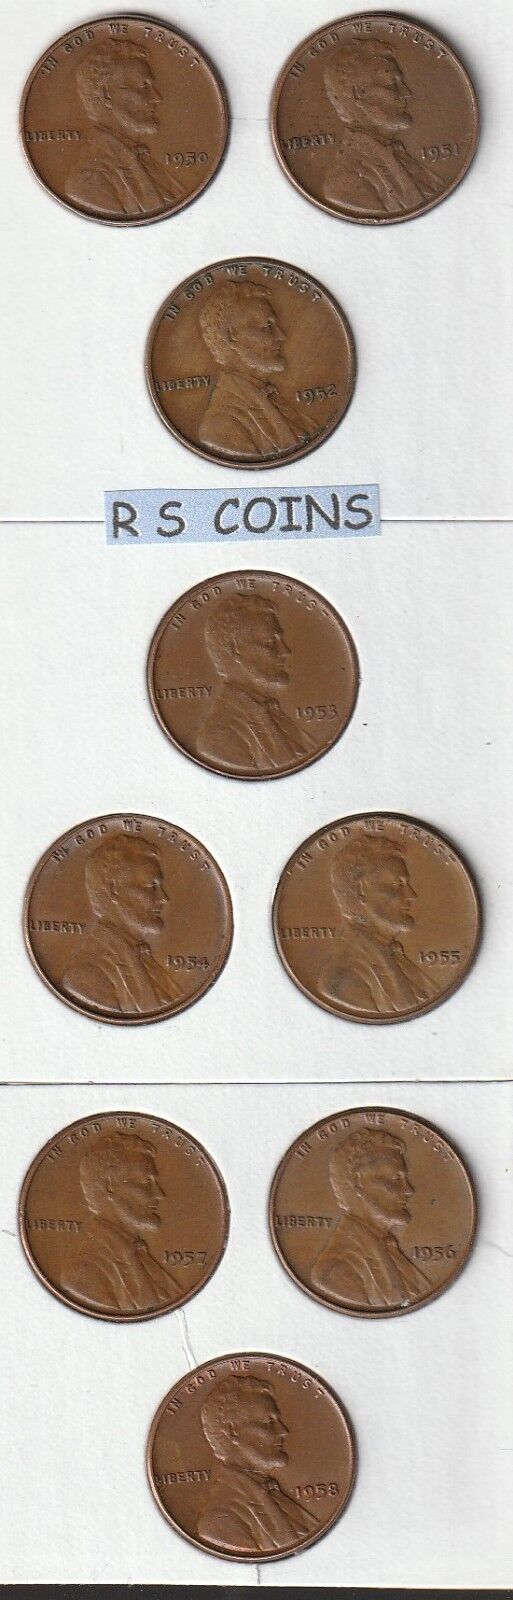 Max 66% OFF BEST SELLERS SALE set of LINCOLN CENTS 1950 1958 co V = Popular products F thru 9